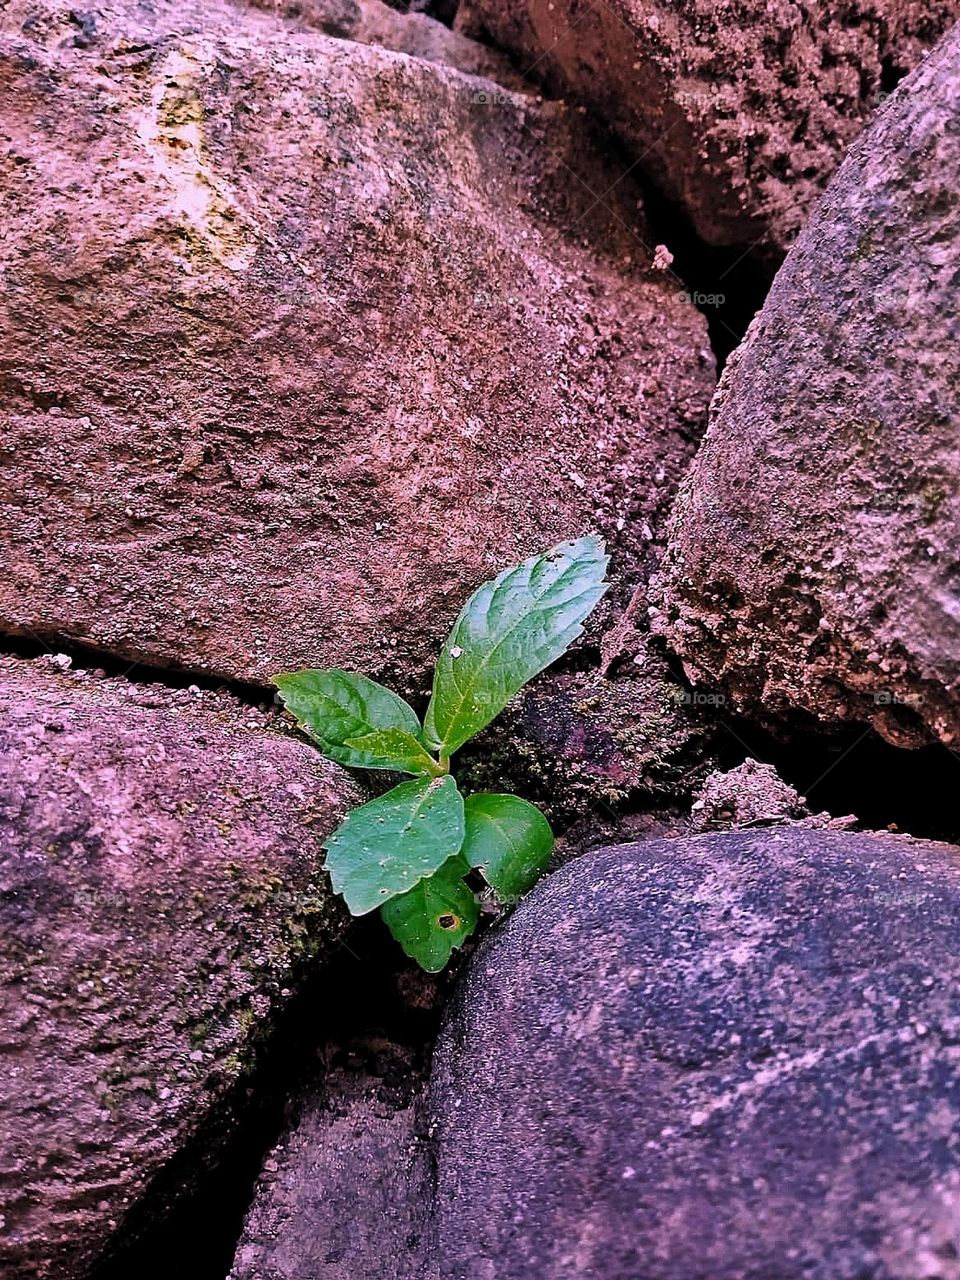 A balanced colour of green leaves into the rock and shadow.